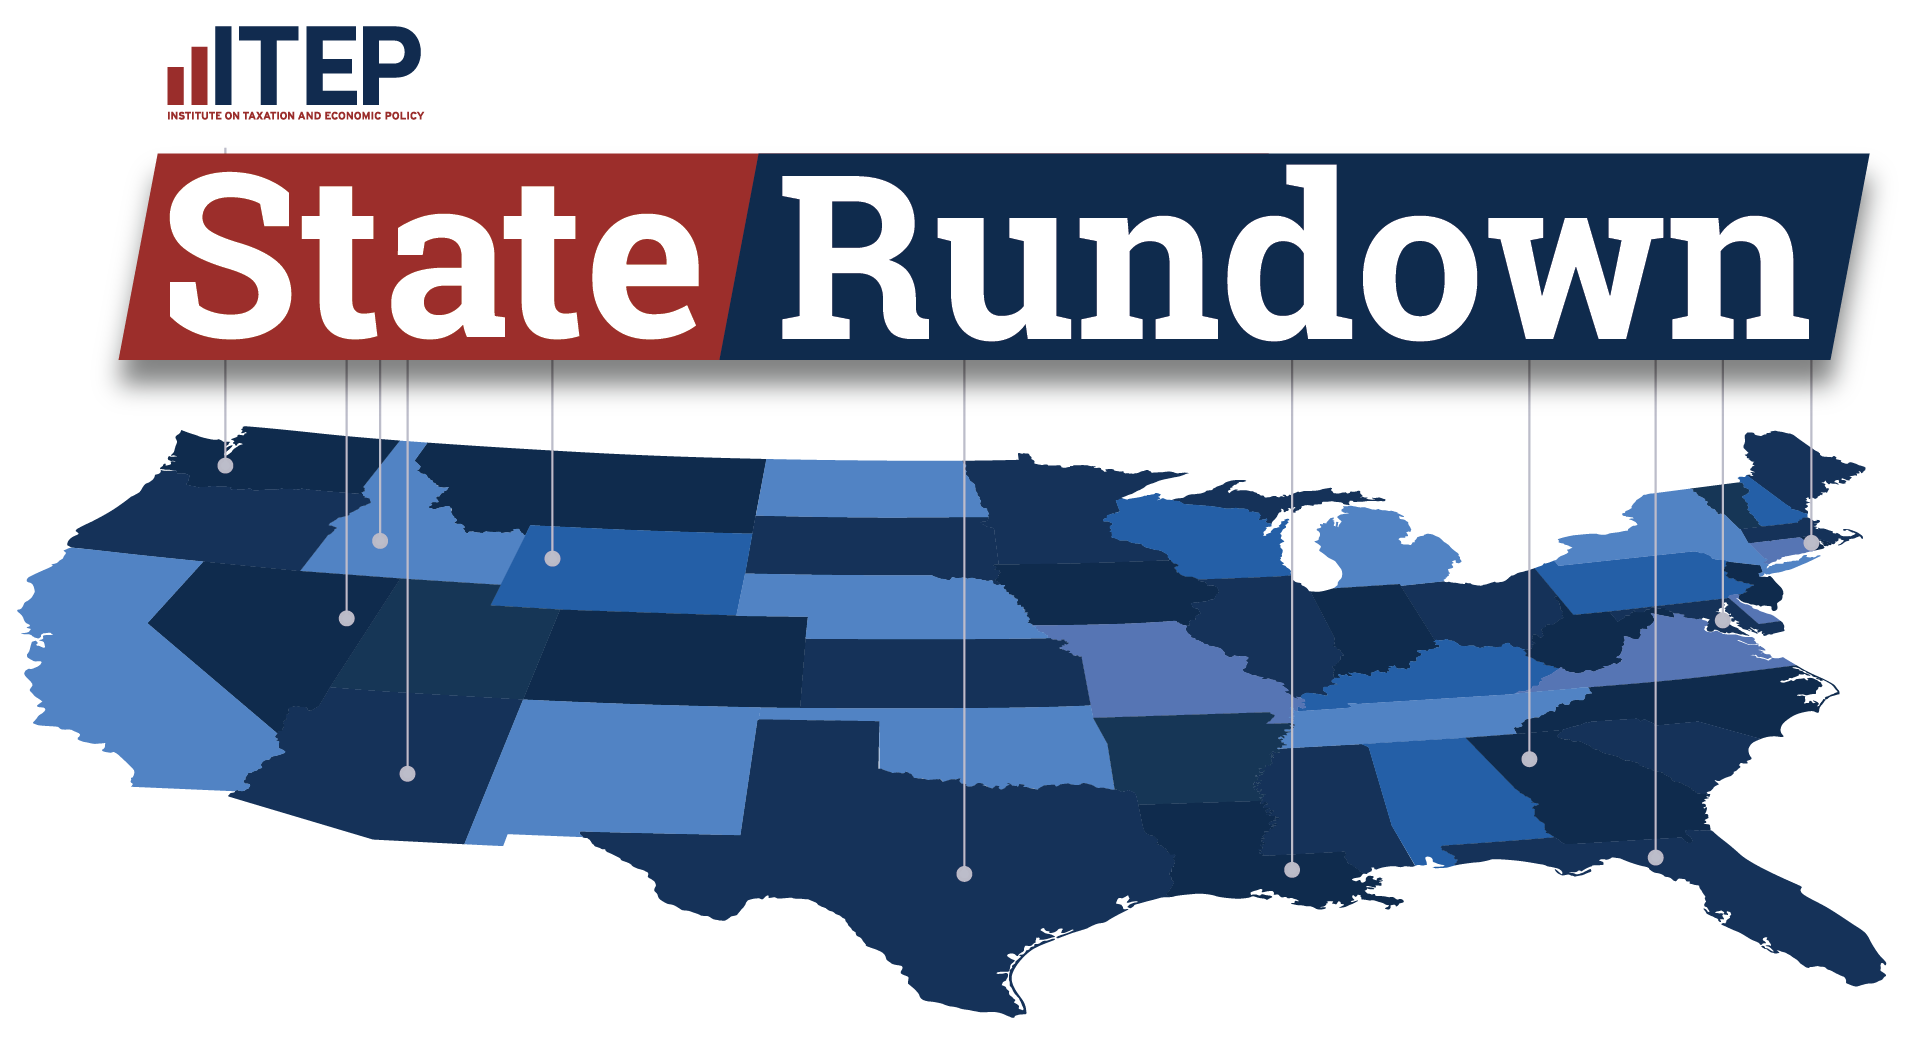 State Rundown 11/2: Midterms on the Mind